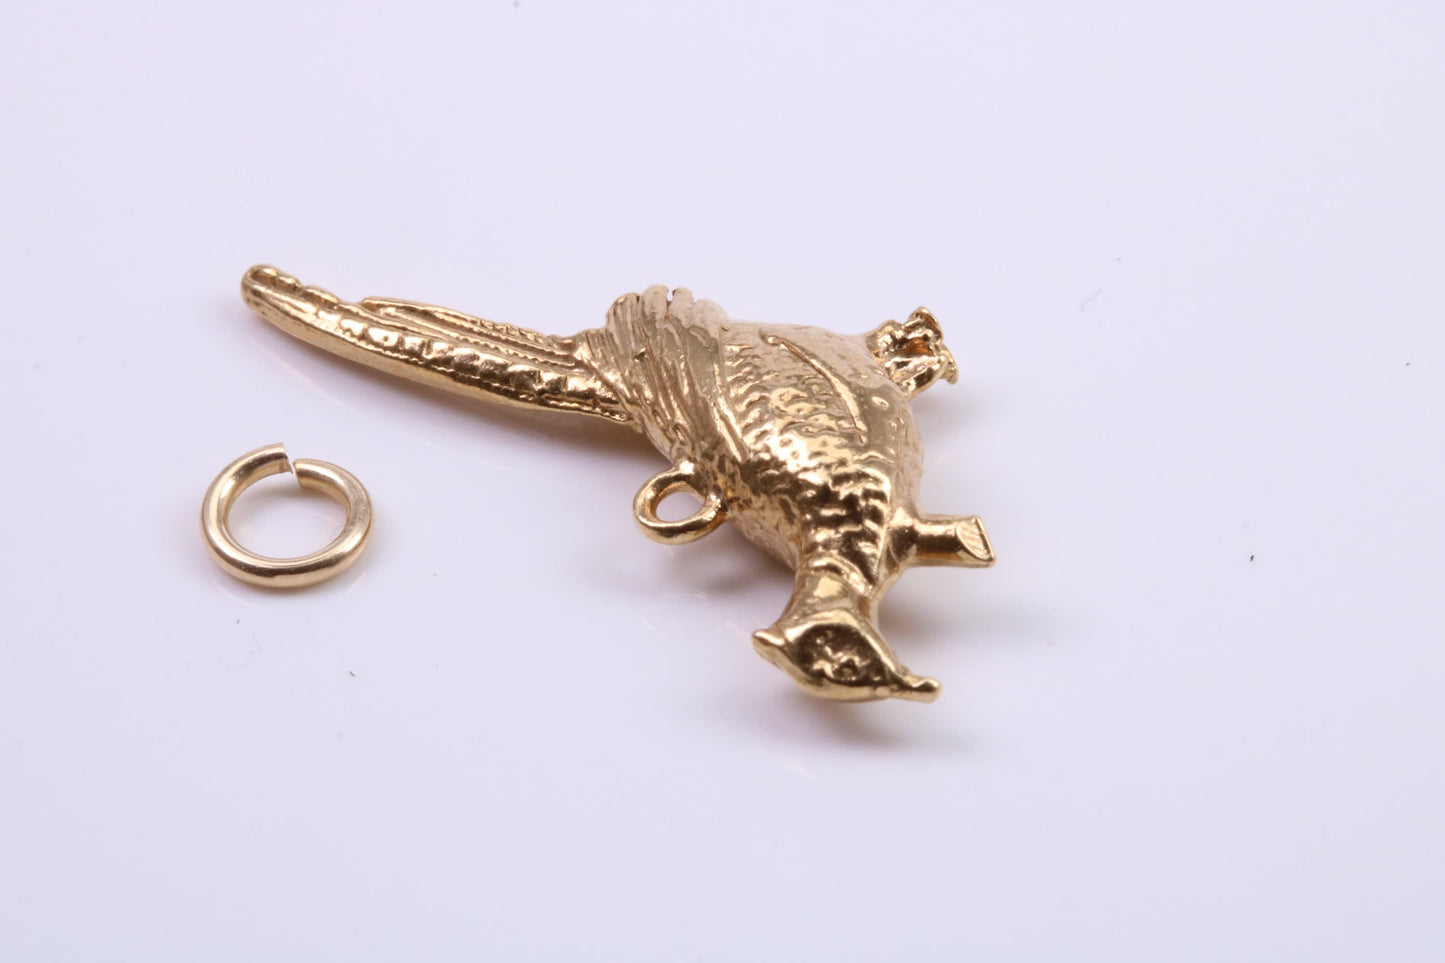 Pheasant Charm, Traditional Charm, Made from Solid 9ct Yellow Gold, British Hallmarked, Complete with Attachment Link